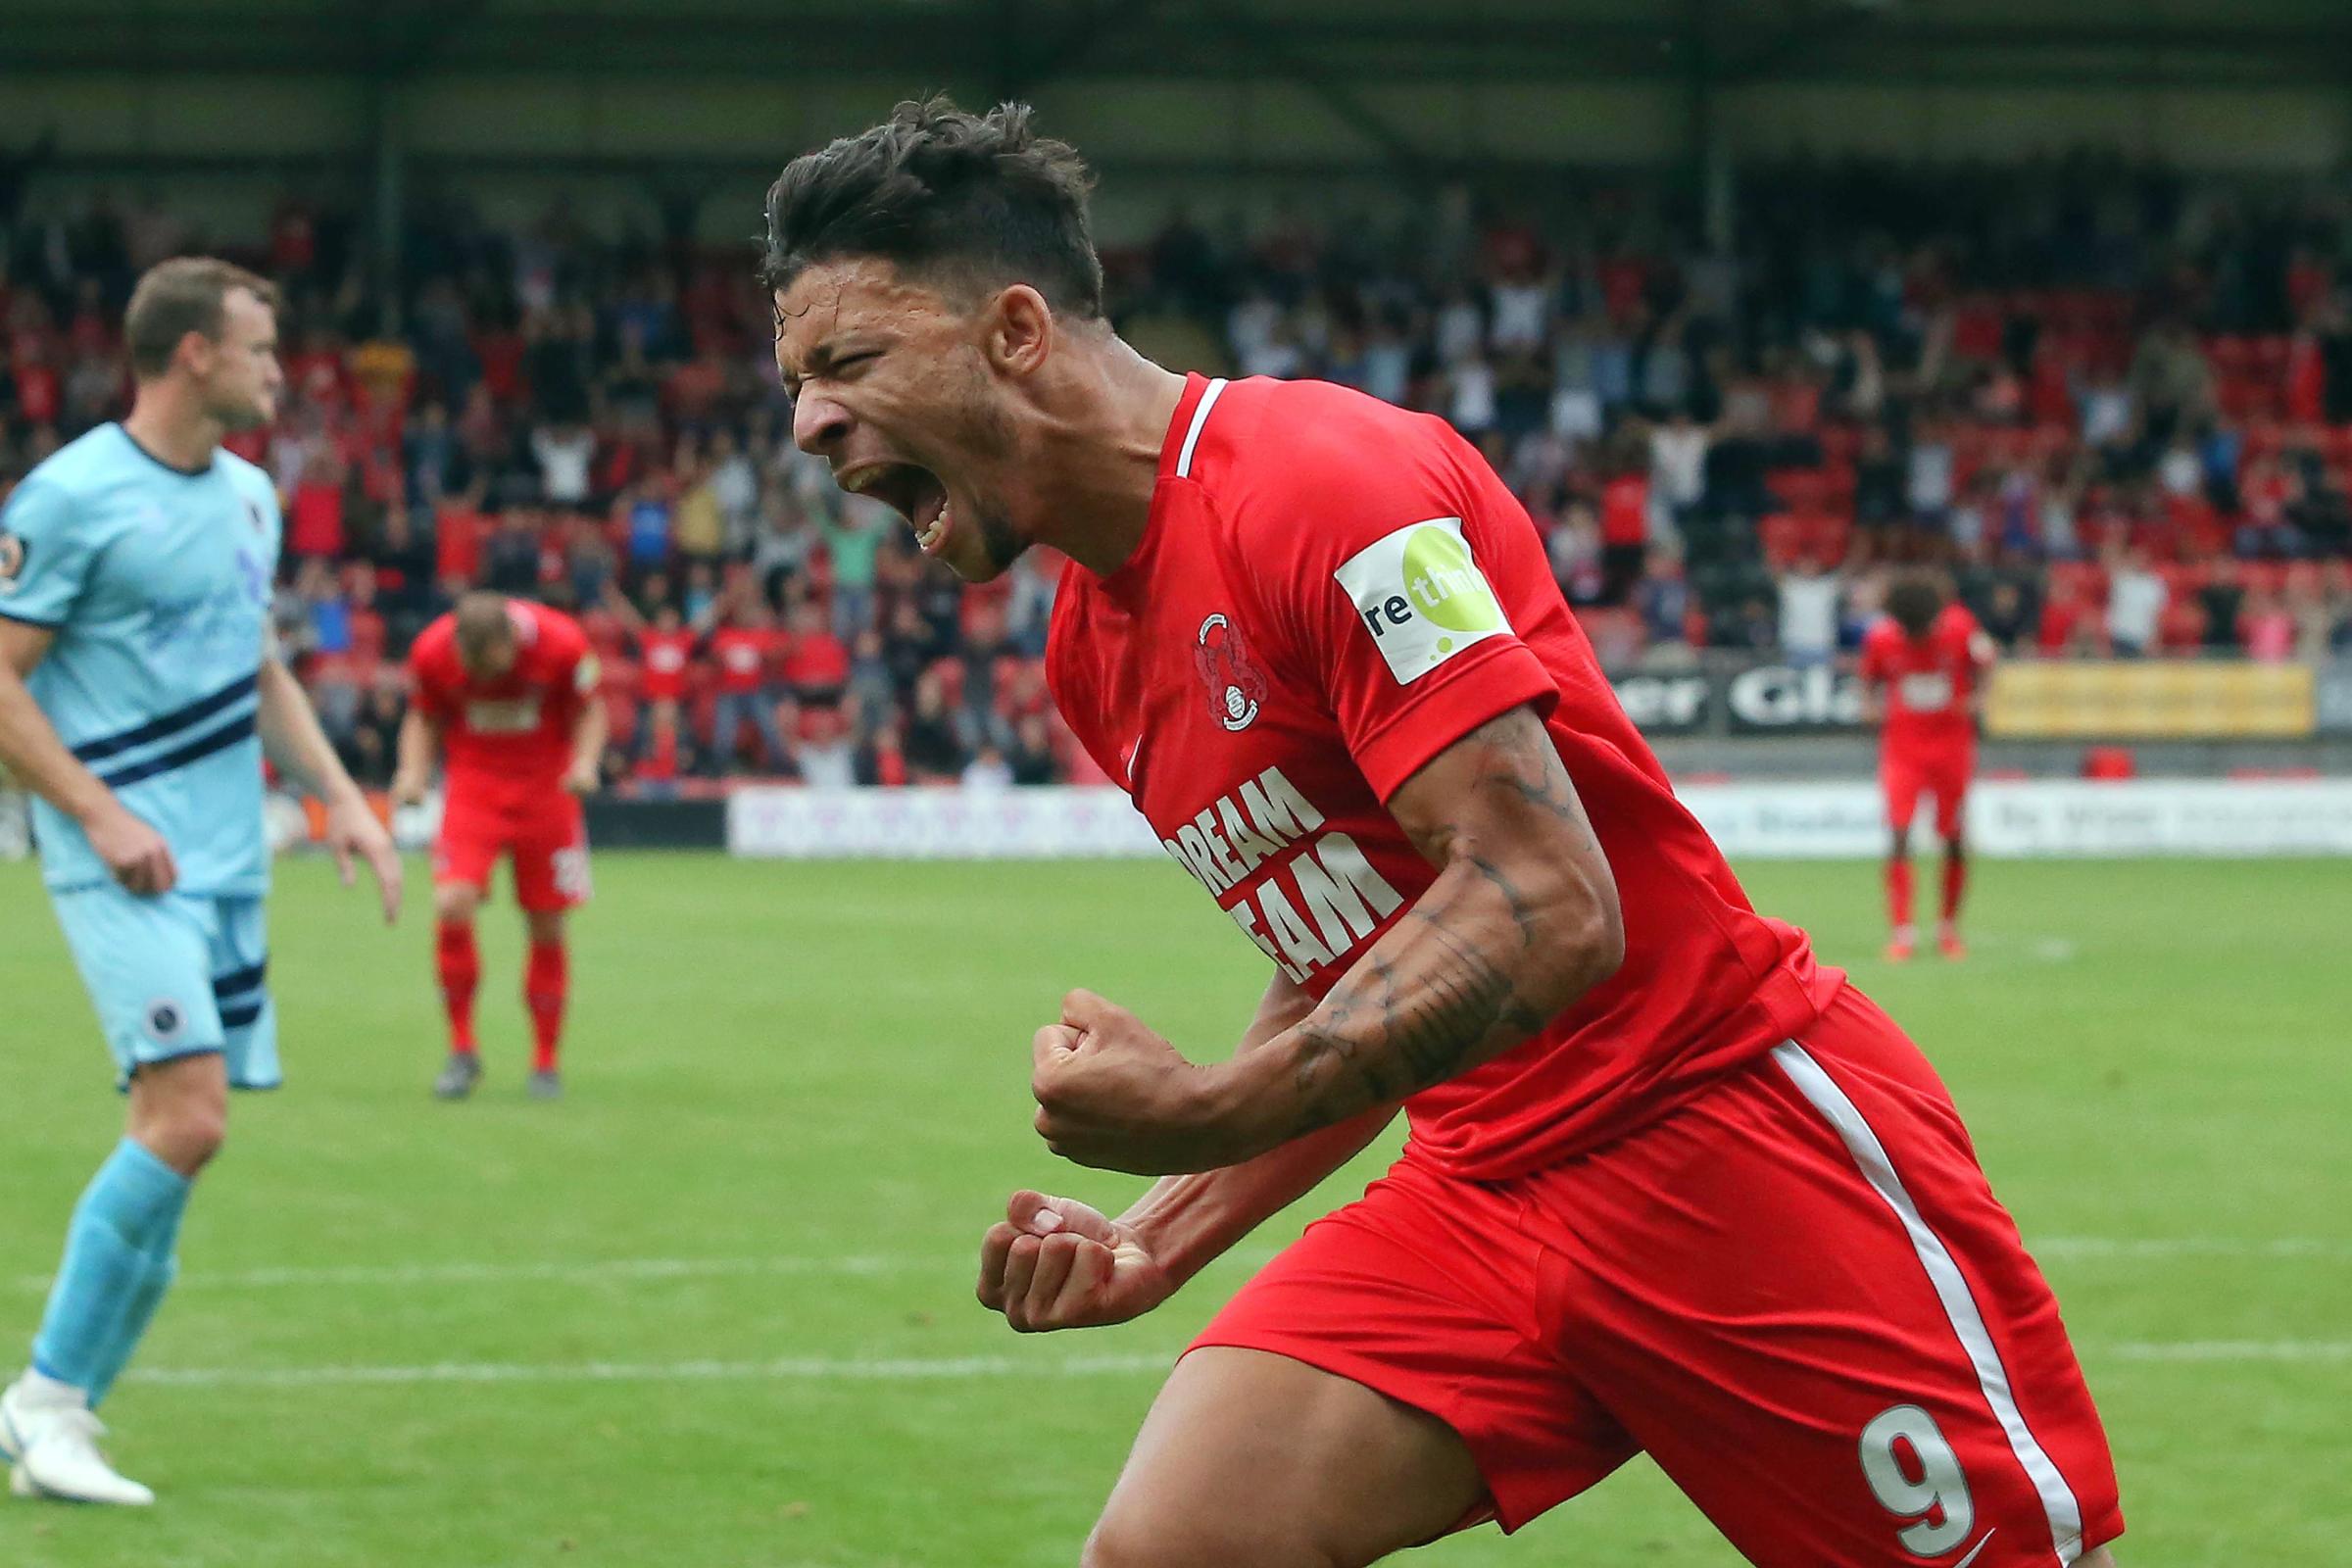 Macauley Bonne leaves Leyton Orient for Charlton Athletic | This Is Local London